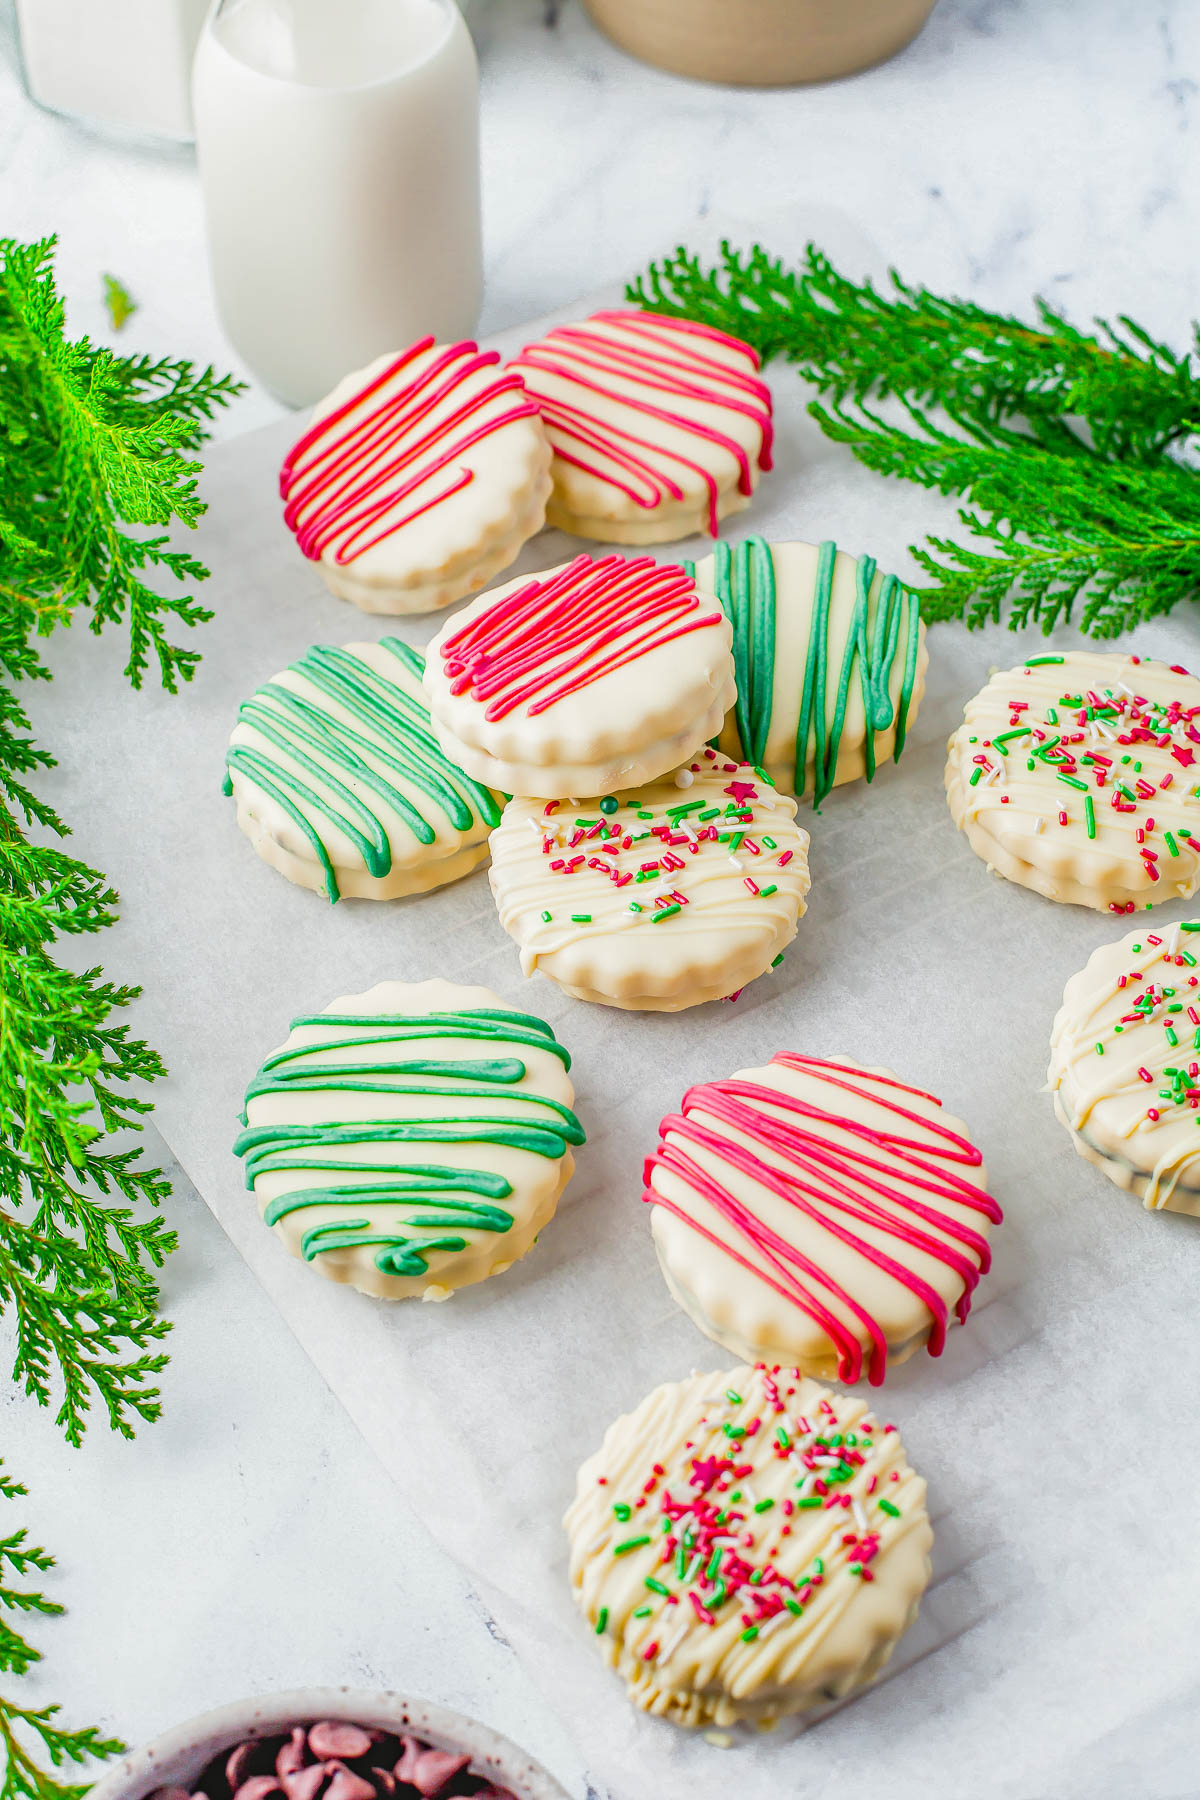 Shortbread Sandwich Cookies – Chocolate filling is sandwiched between two buttery shortbread cookies before the cookies are dipped in sweet white chocolate and festively decorated! EASY enough for novice bakers and PERFECT for holiday entertaining, gifting, and cookie exchanges!